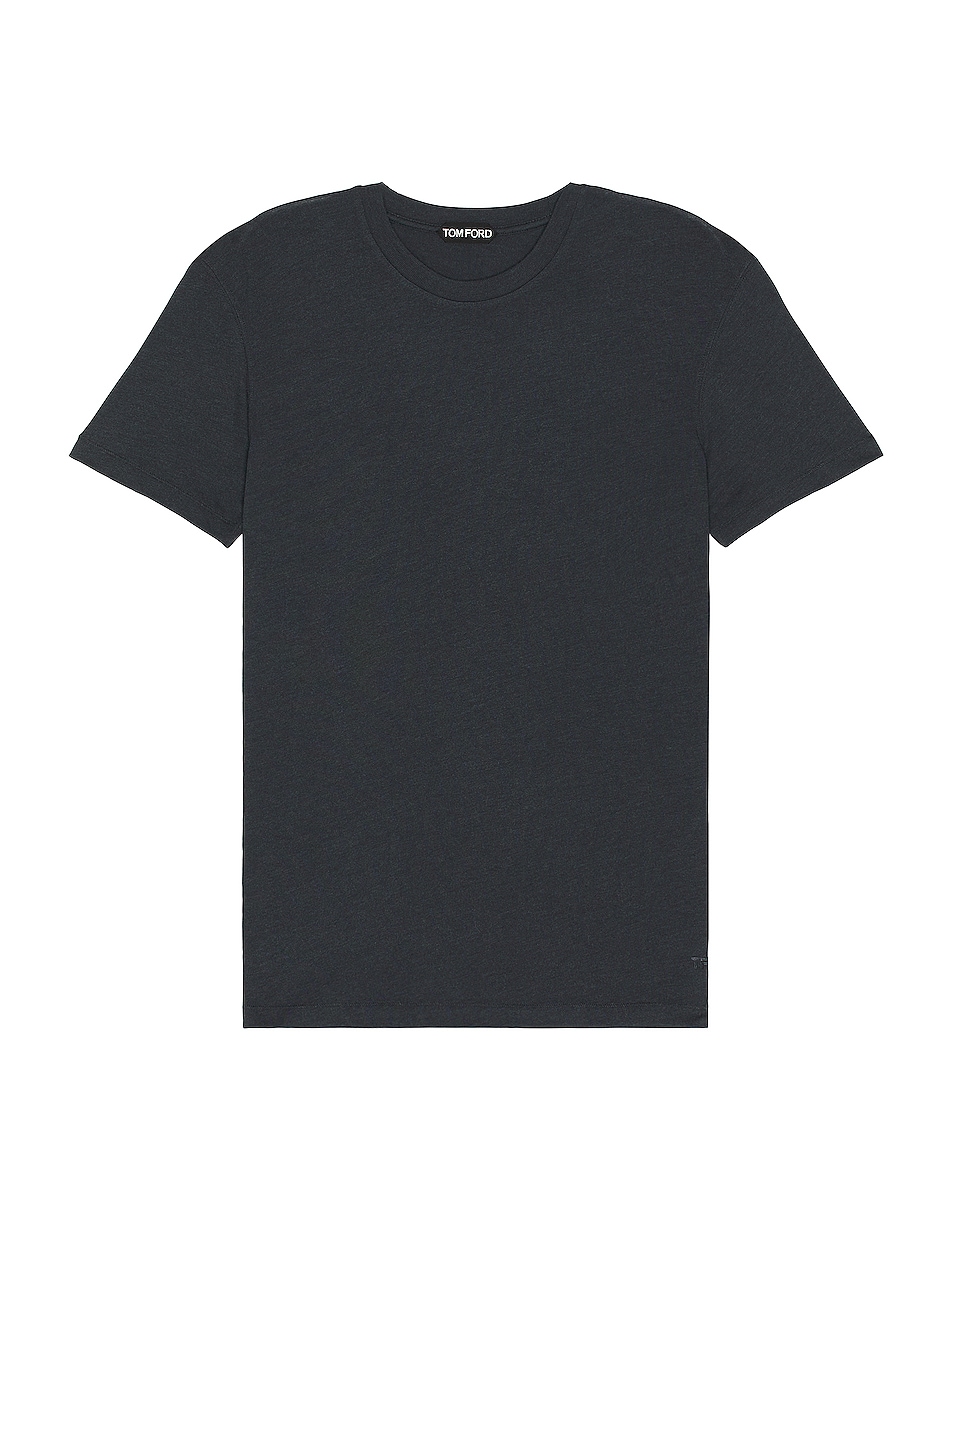 Image 1 of TOM FORD Short Sleeve Crew Neck T-shirt in Black